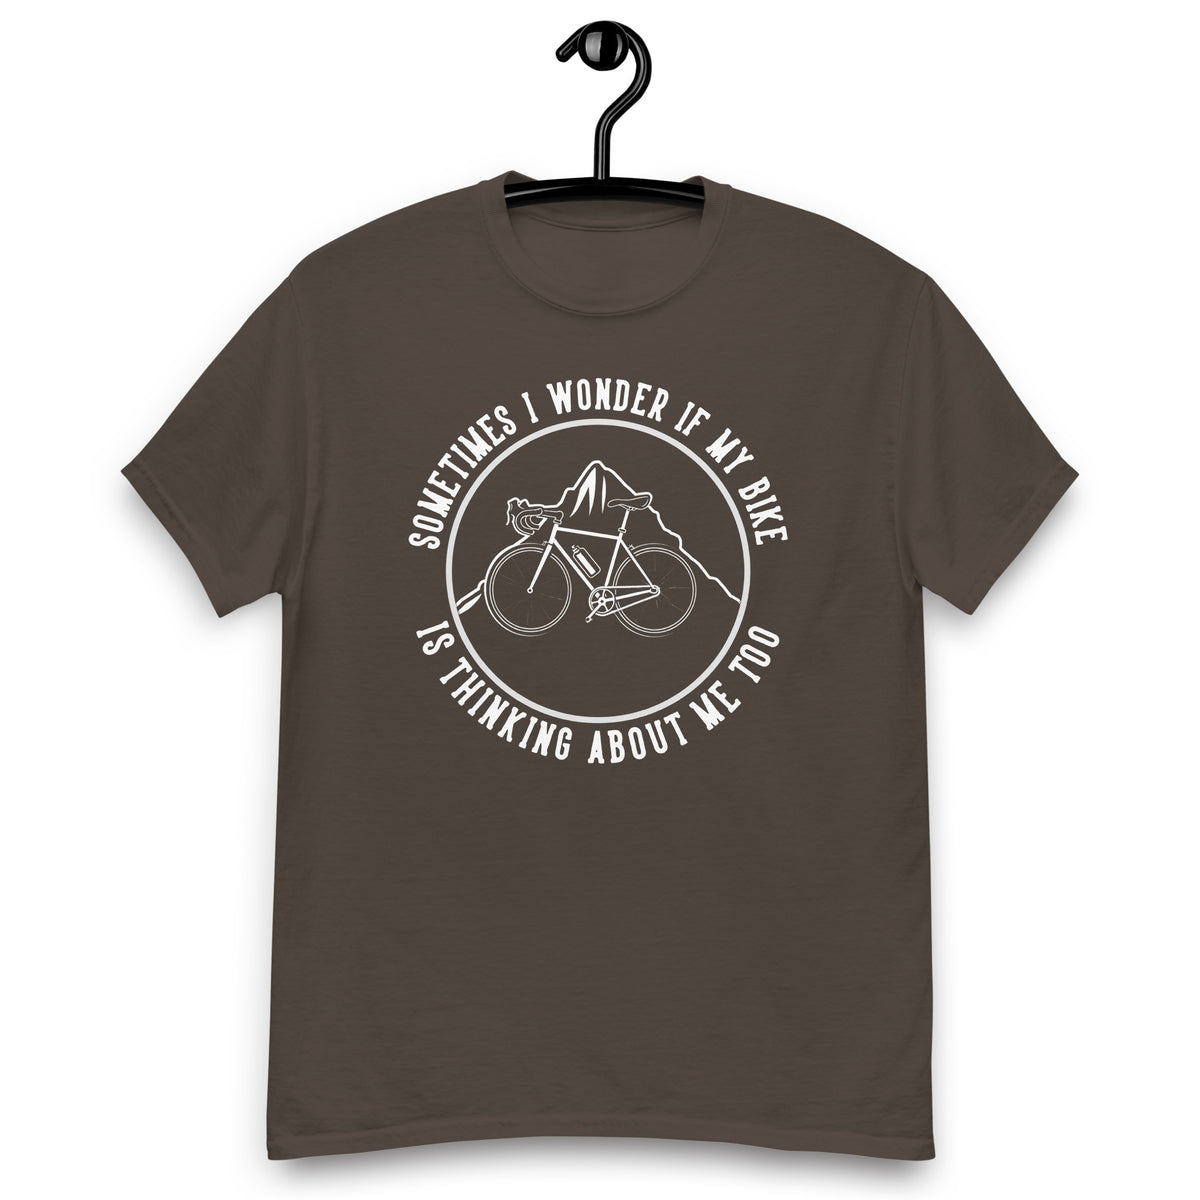 Fahrrad Shirts "Sometimes I Wonder If My Bike Is Thinking About Me Too" Variane 1